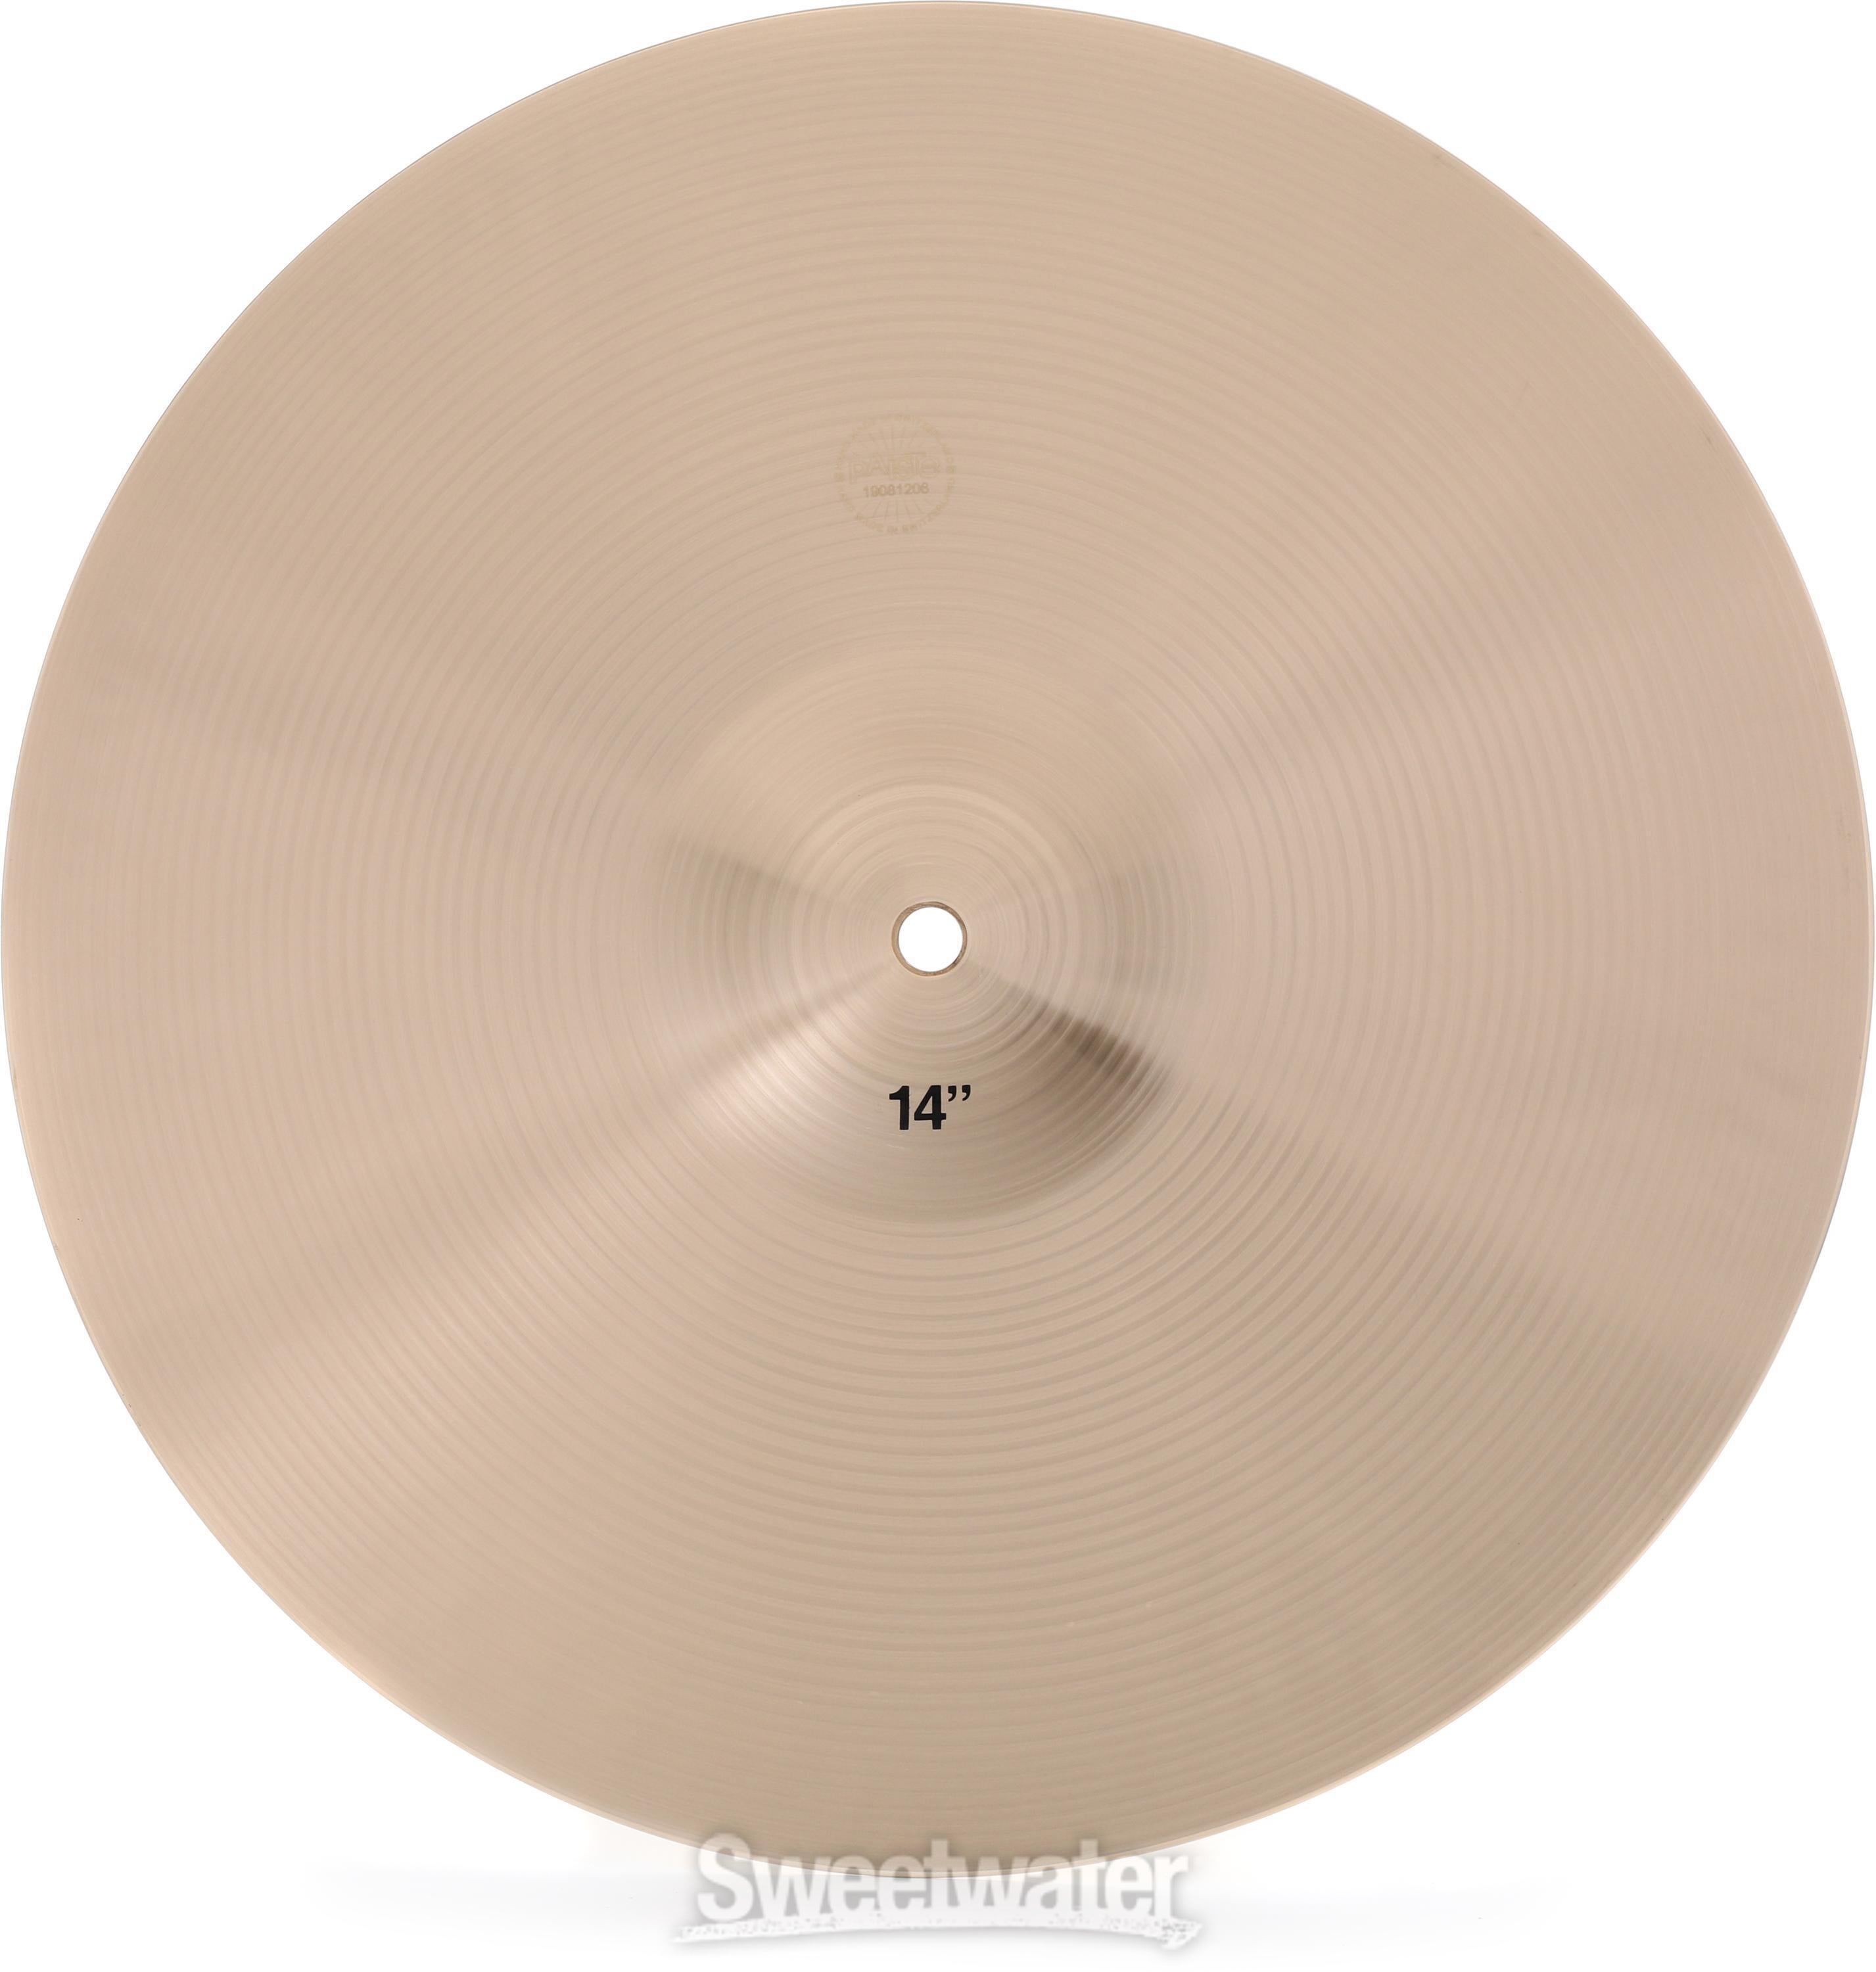 Paiste 14 inch Formula 602 Heavy Hi-hat Cymbals | Sweetwater